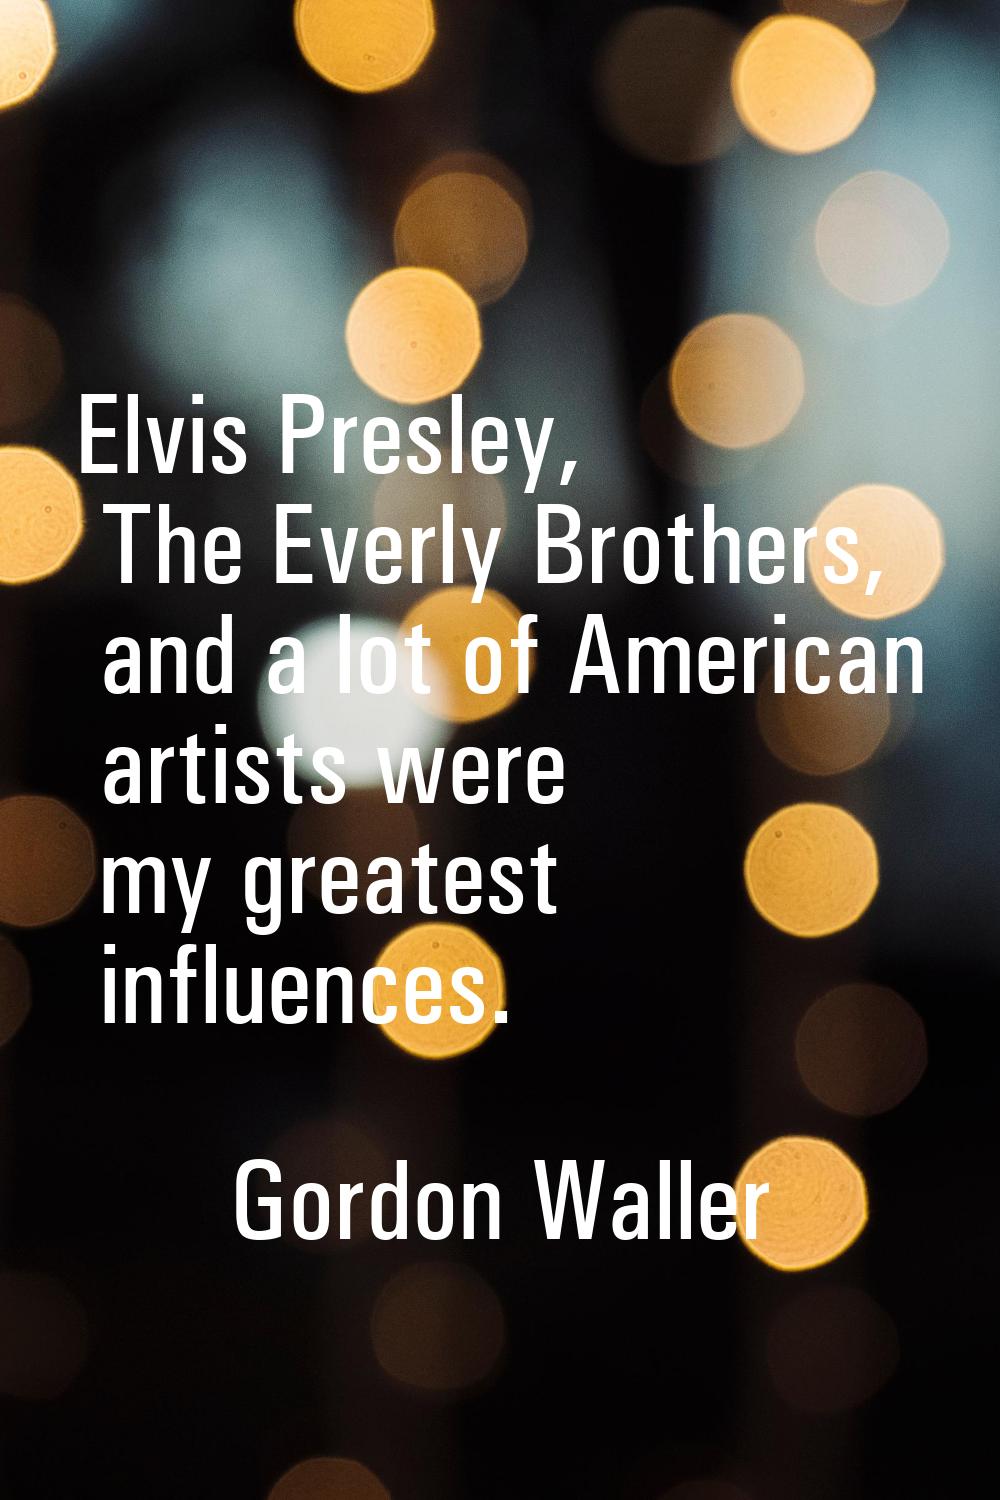 Elvis Presley, The Everly Brothers, and a lot of American artists were my greatest influences.